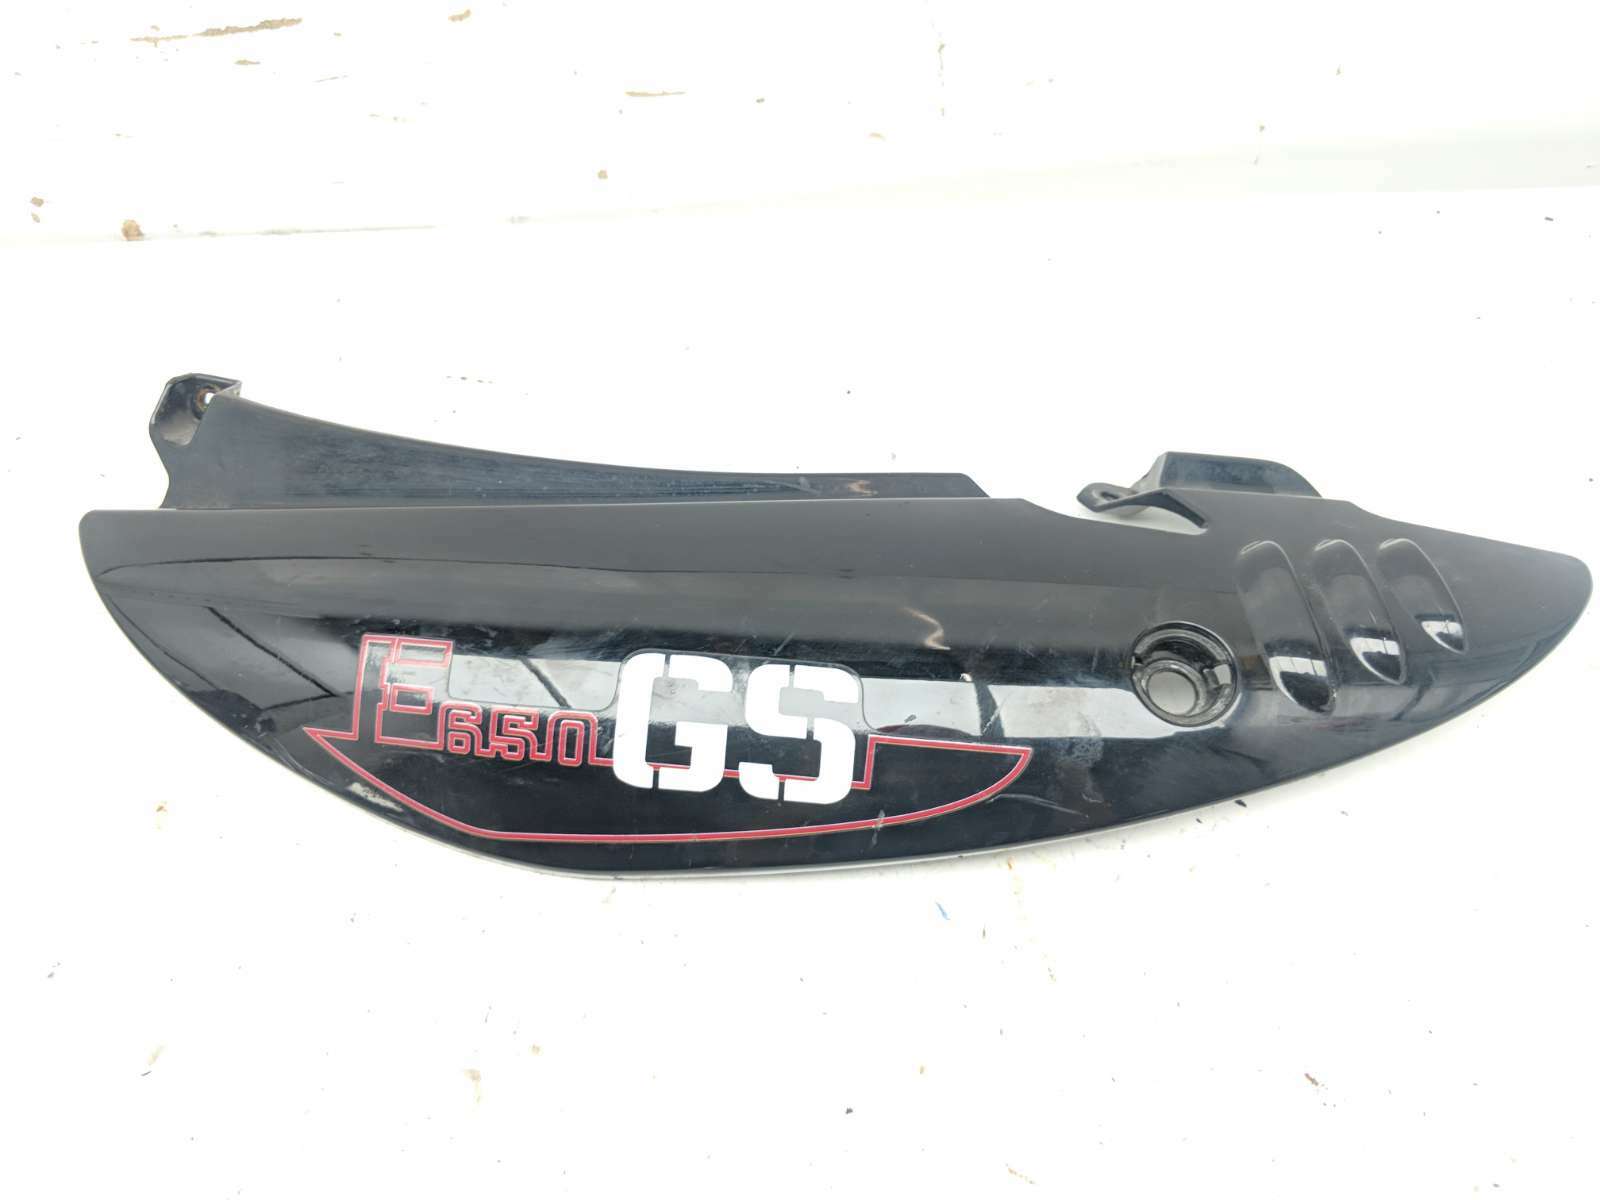 07 BMW F650 GS F650GS Left Rear Tail Fairing Cover Panel 2315725